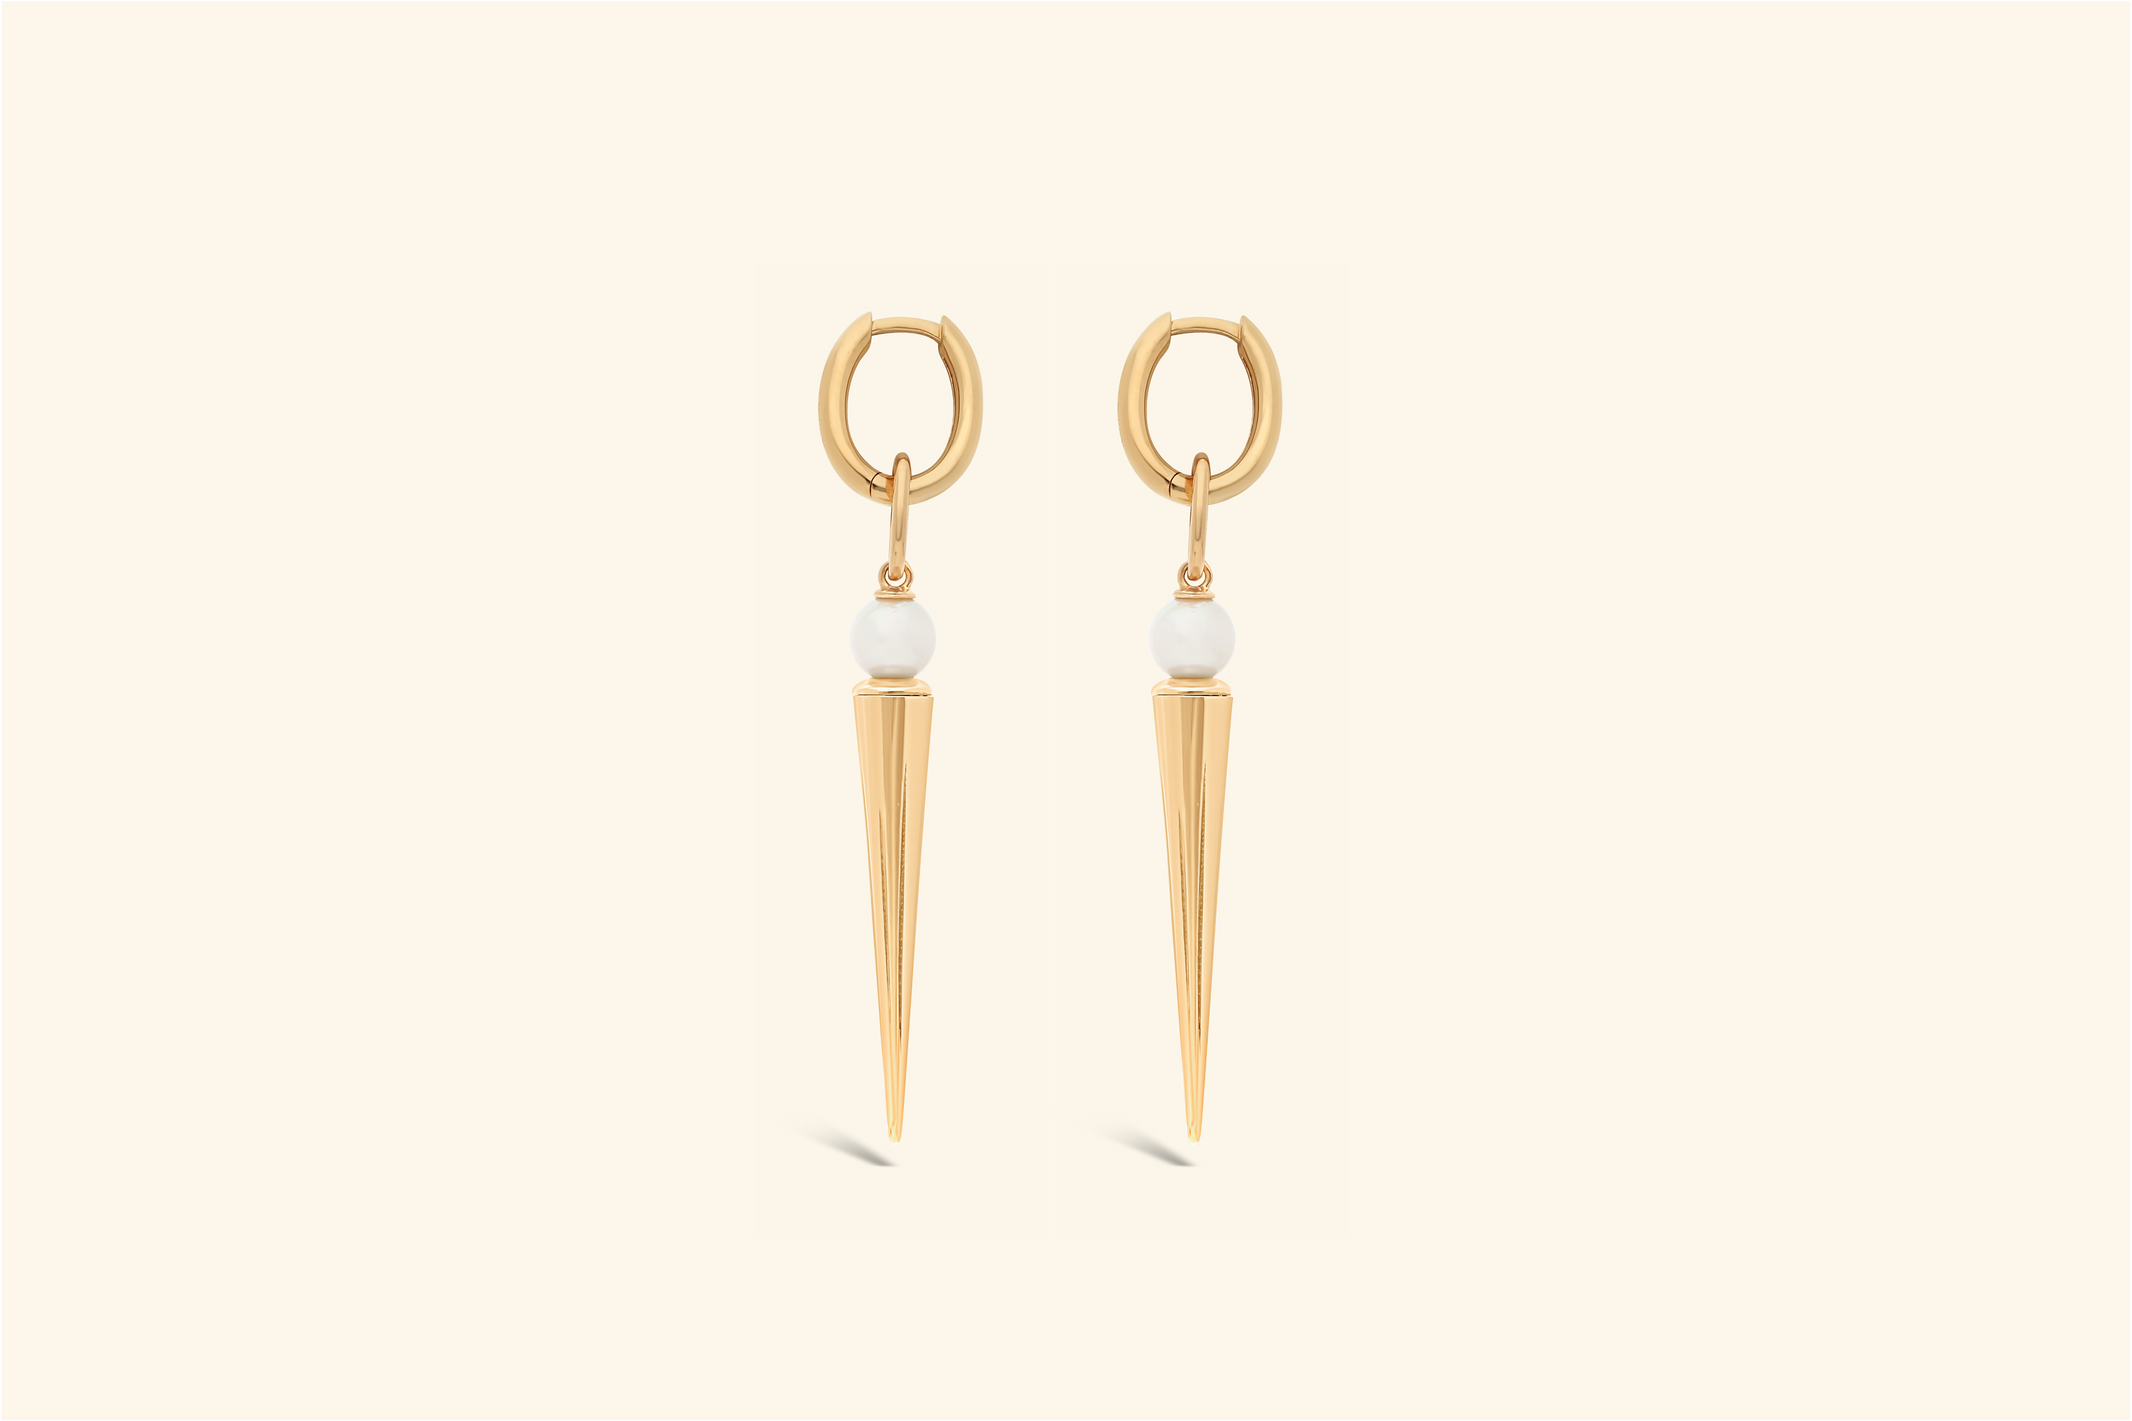 Pampille earrings, yellow gold and pearls